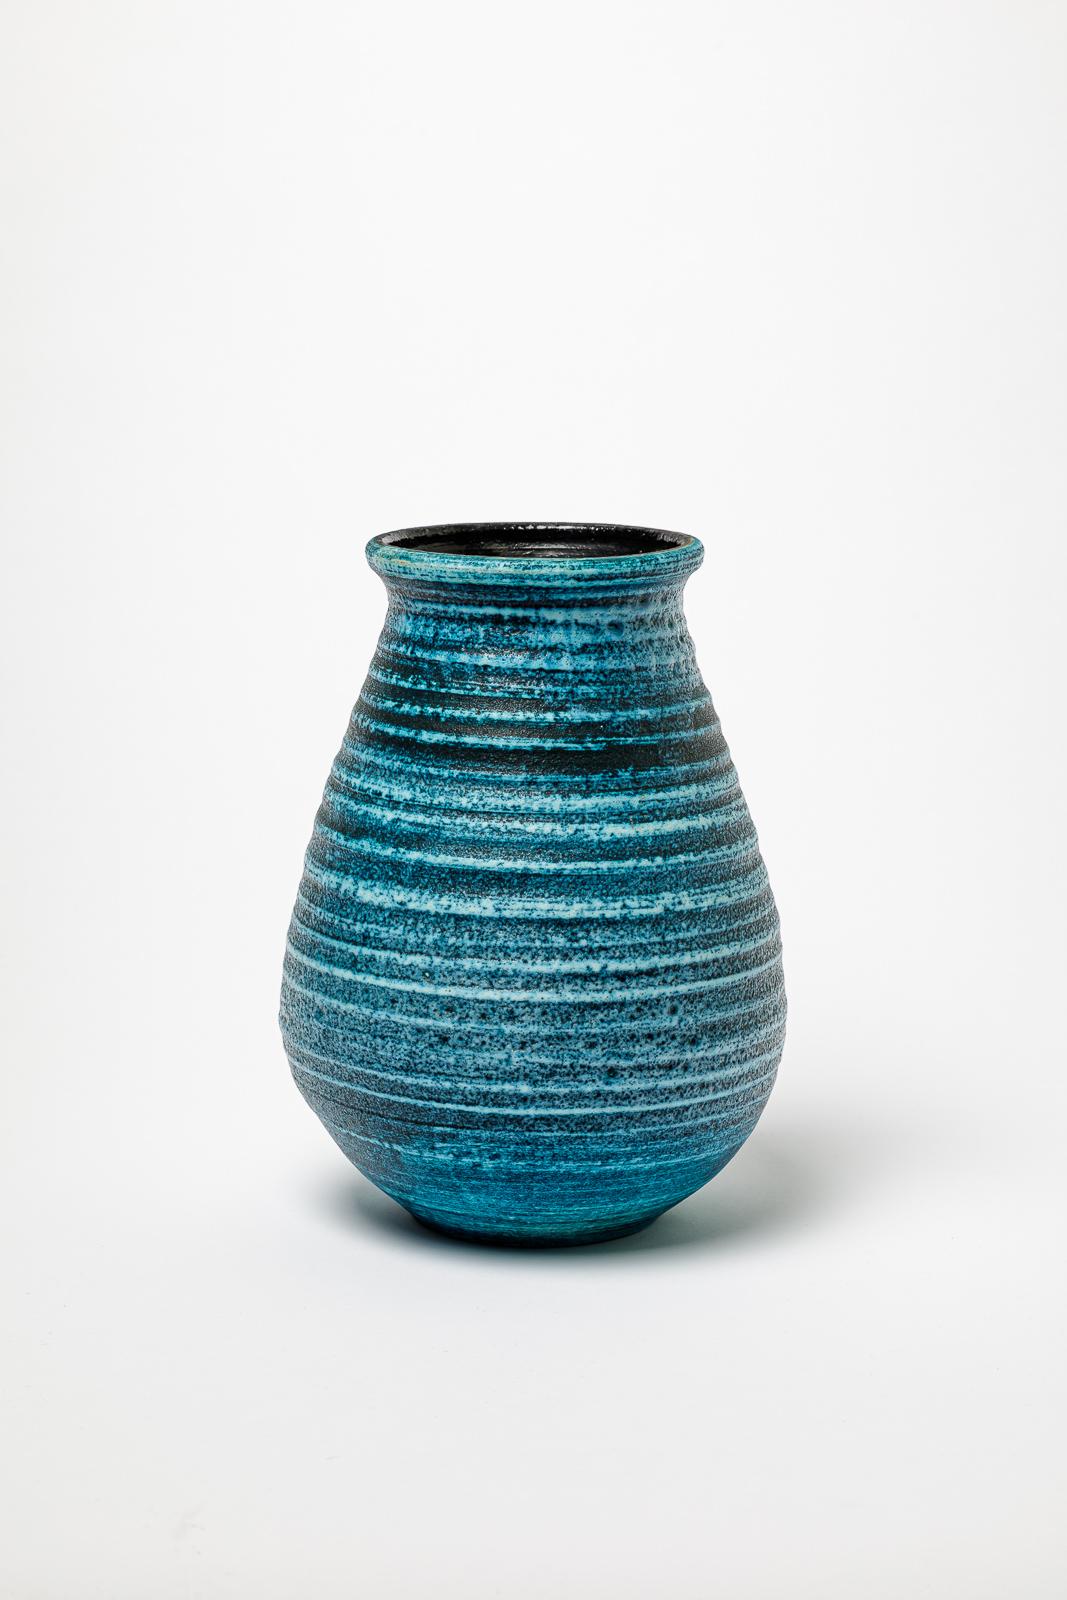 Blue glazed ceramic vase by Accolay.
Artist signature under the base. Circa 1970.
H : 10.2’ x 7.1’ inches.